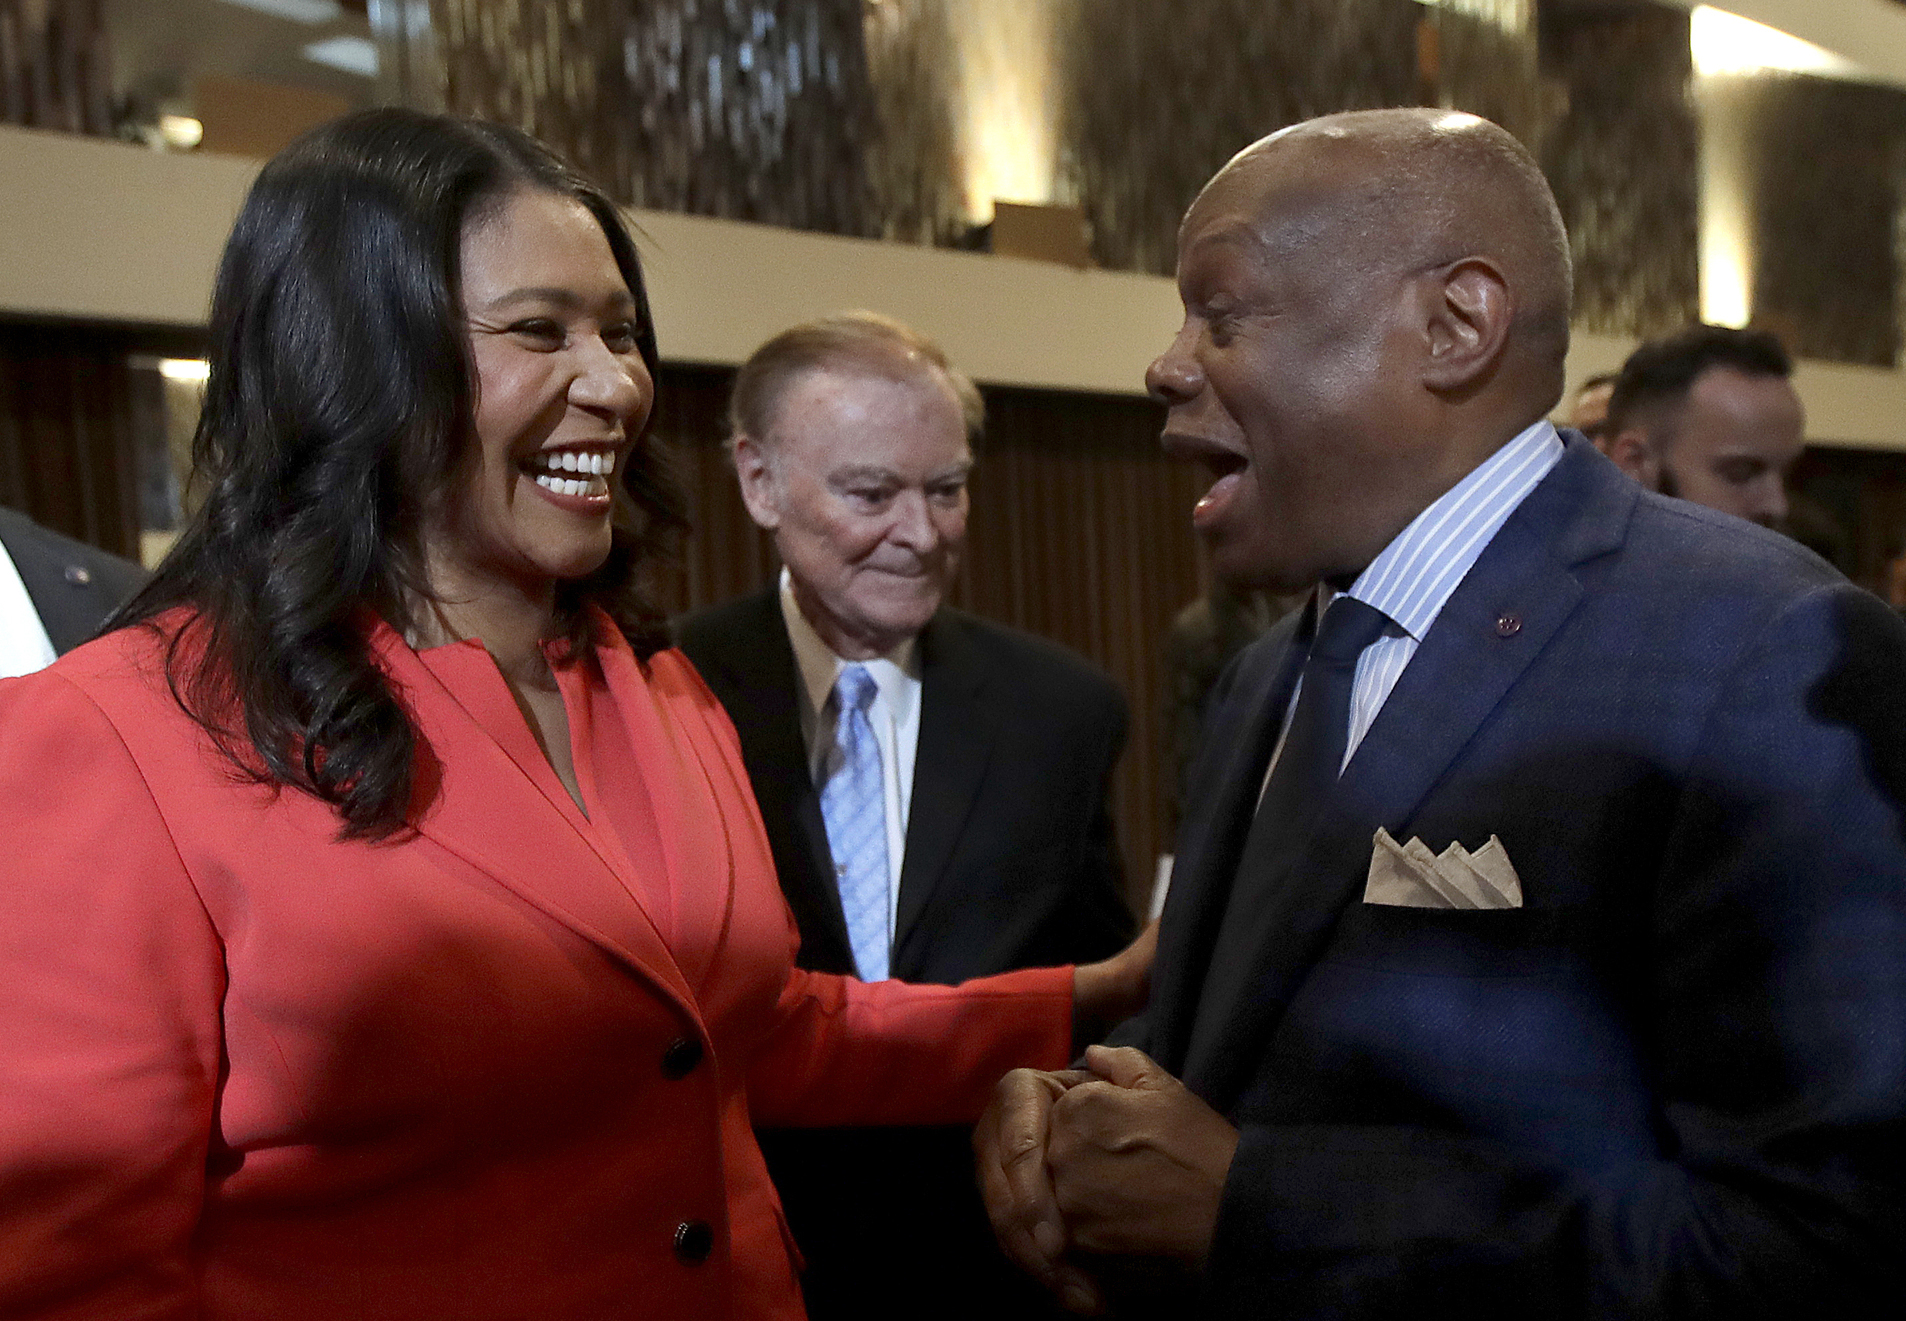 San Francisco Mayor London Breed shares a laugh with Willie Brown after her 2019 state of the city speech.